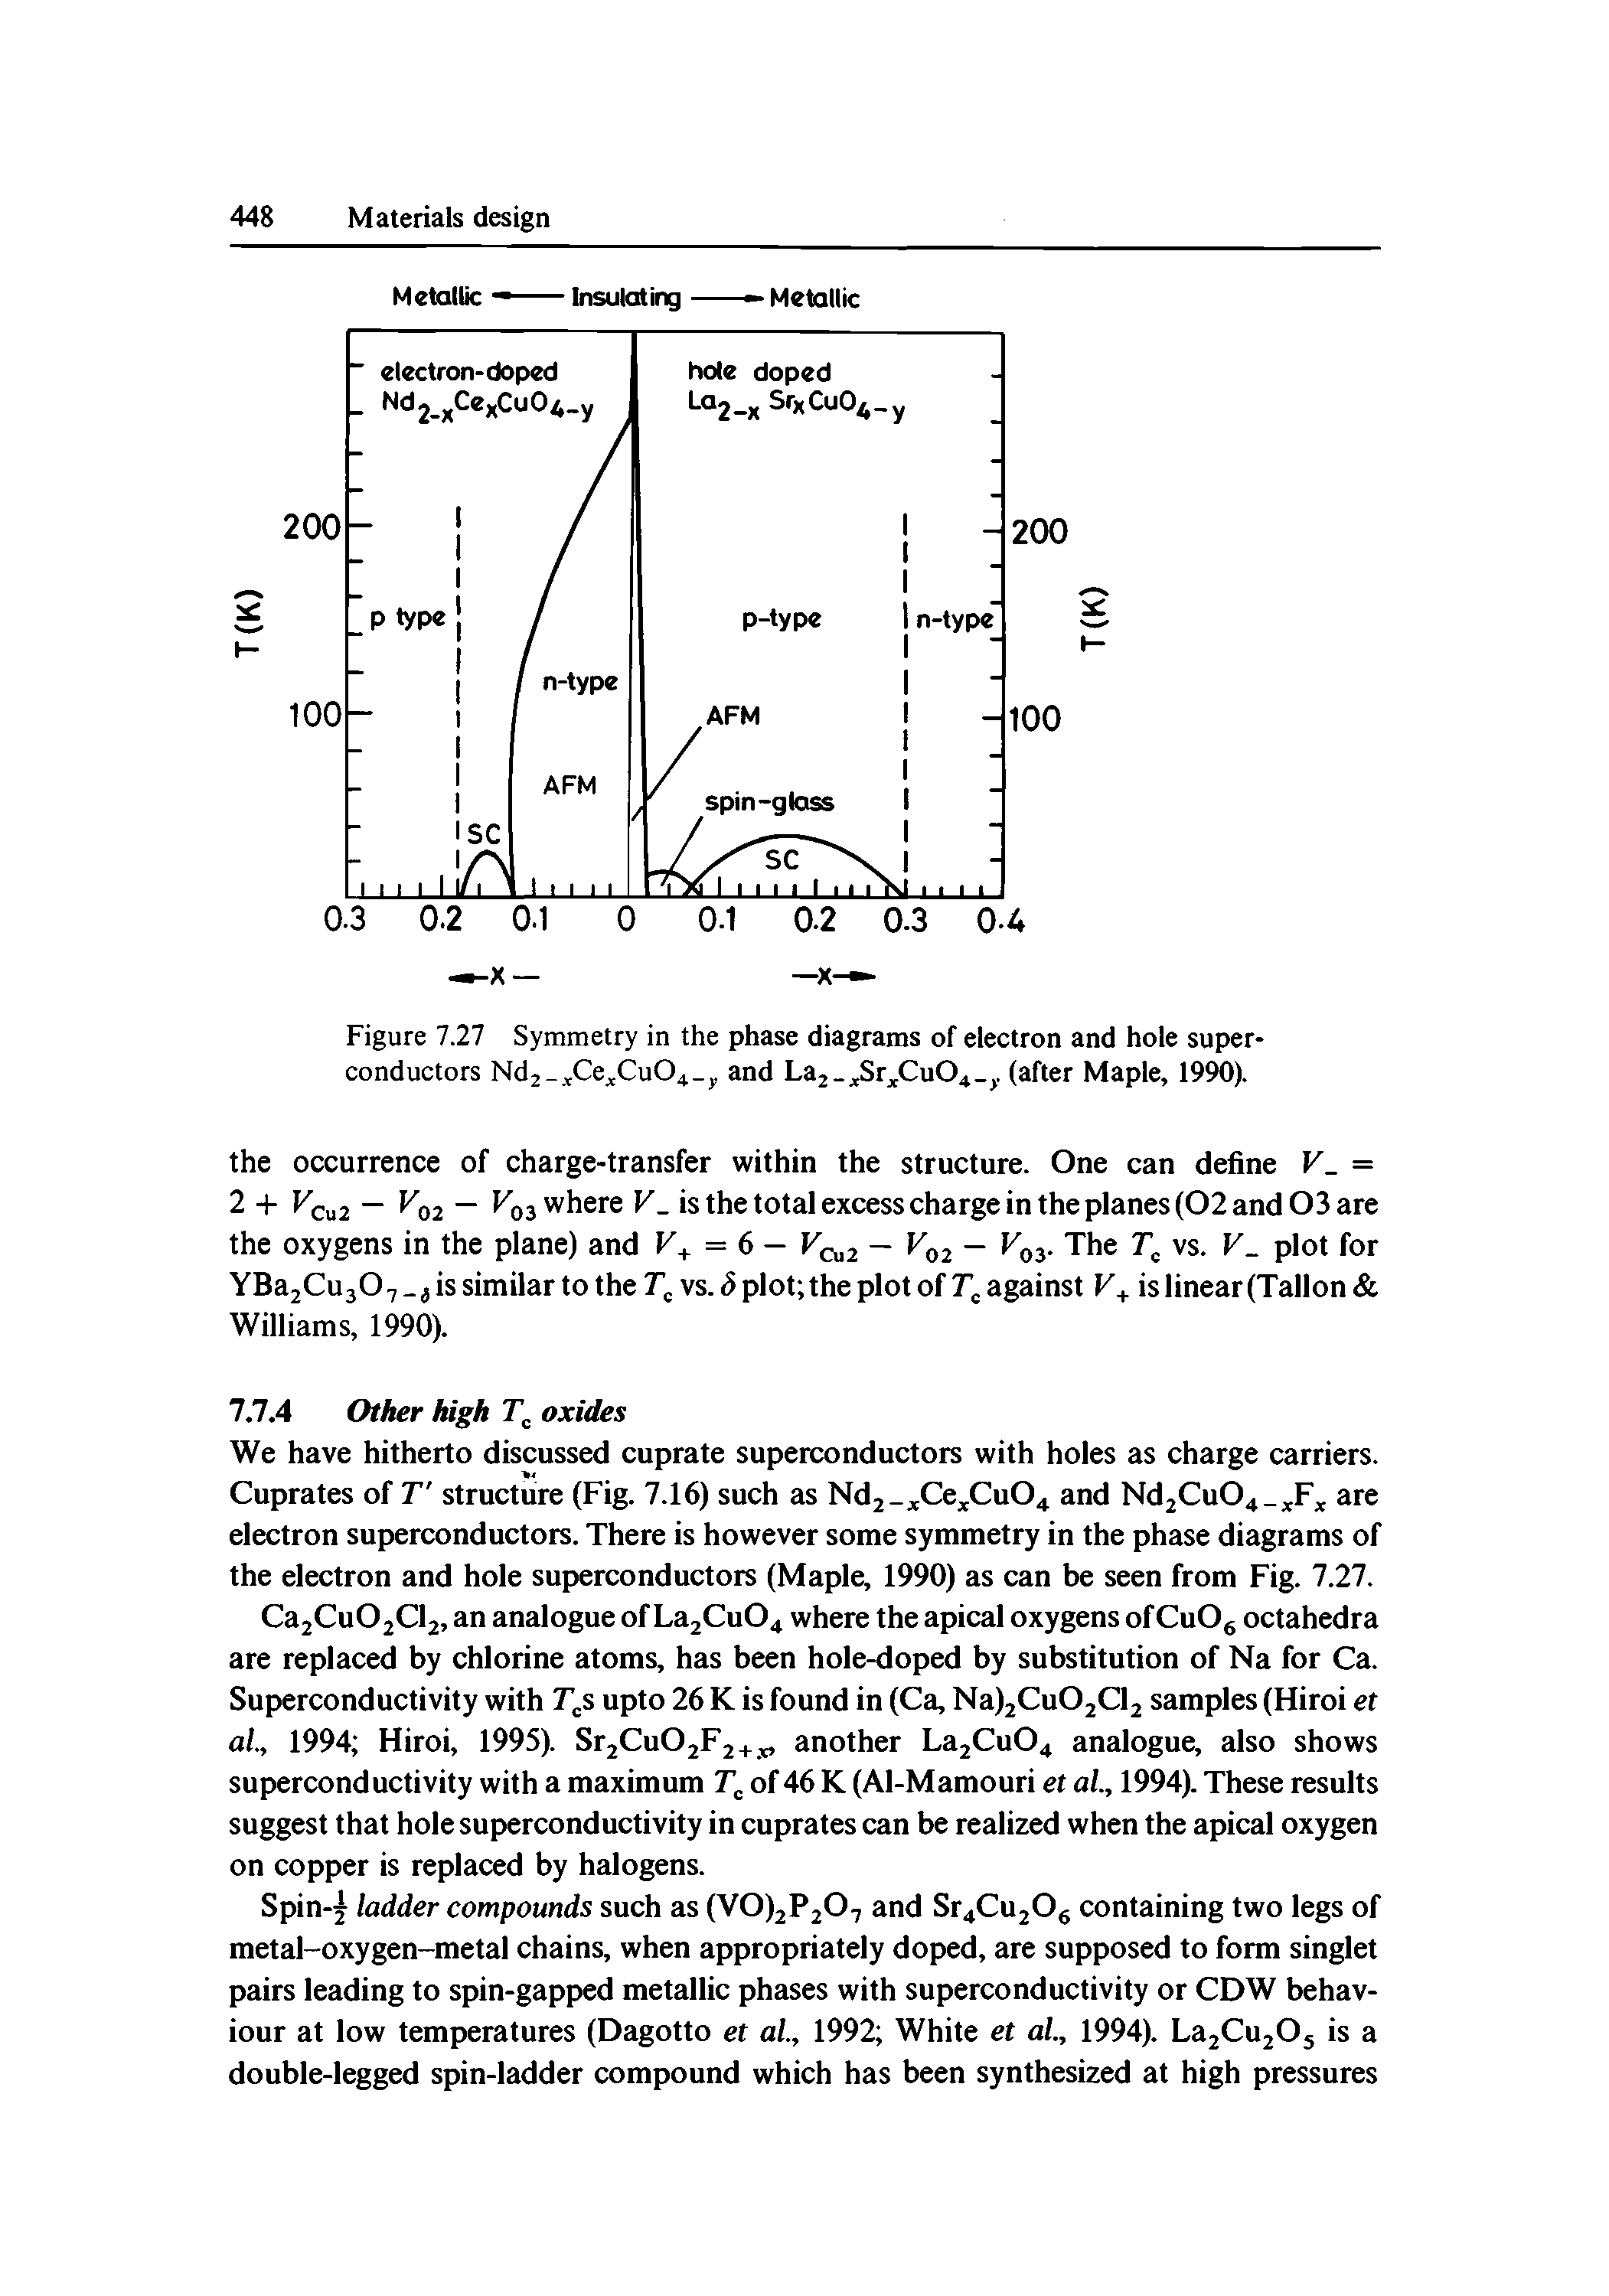 Figure 7.27 Symmetry in the phase diagrams of electron and hole superconductors Nd2-, Ce Cu04 y and Laj- Sr CuO., . (after Maple, 1990).